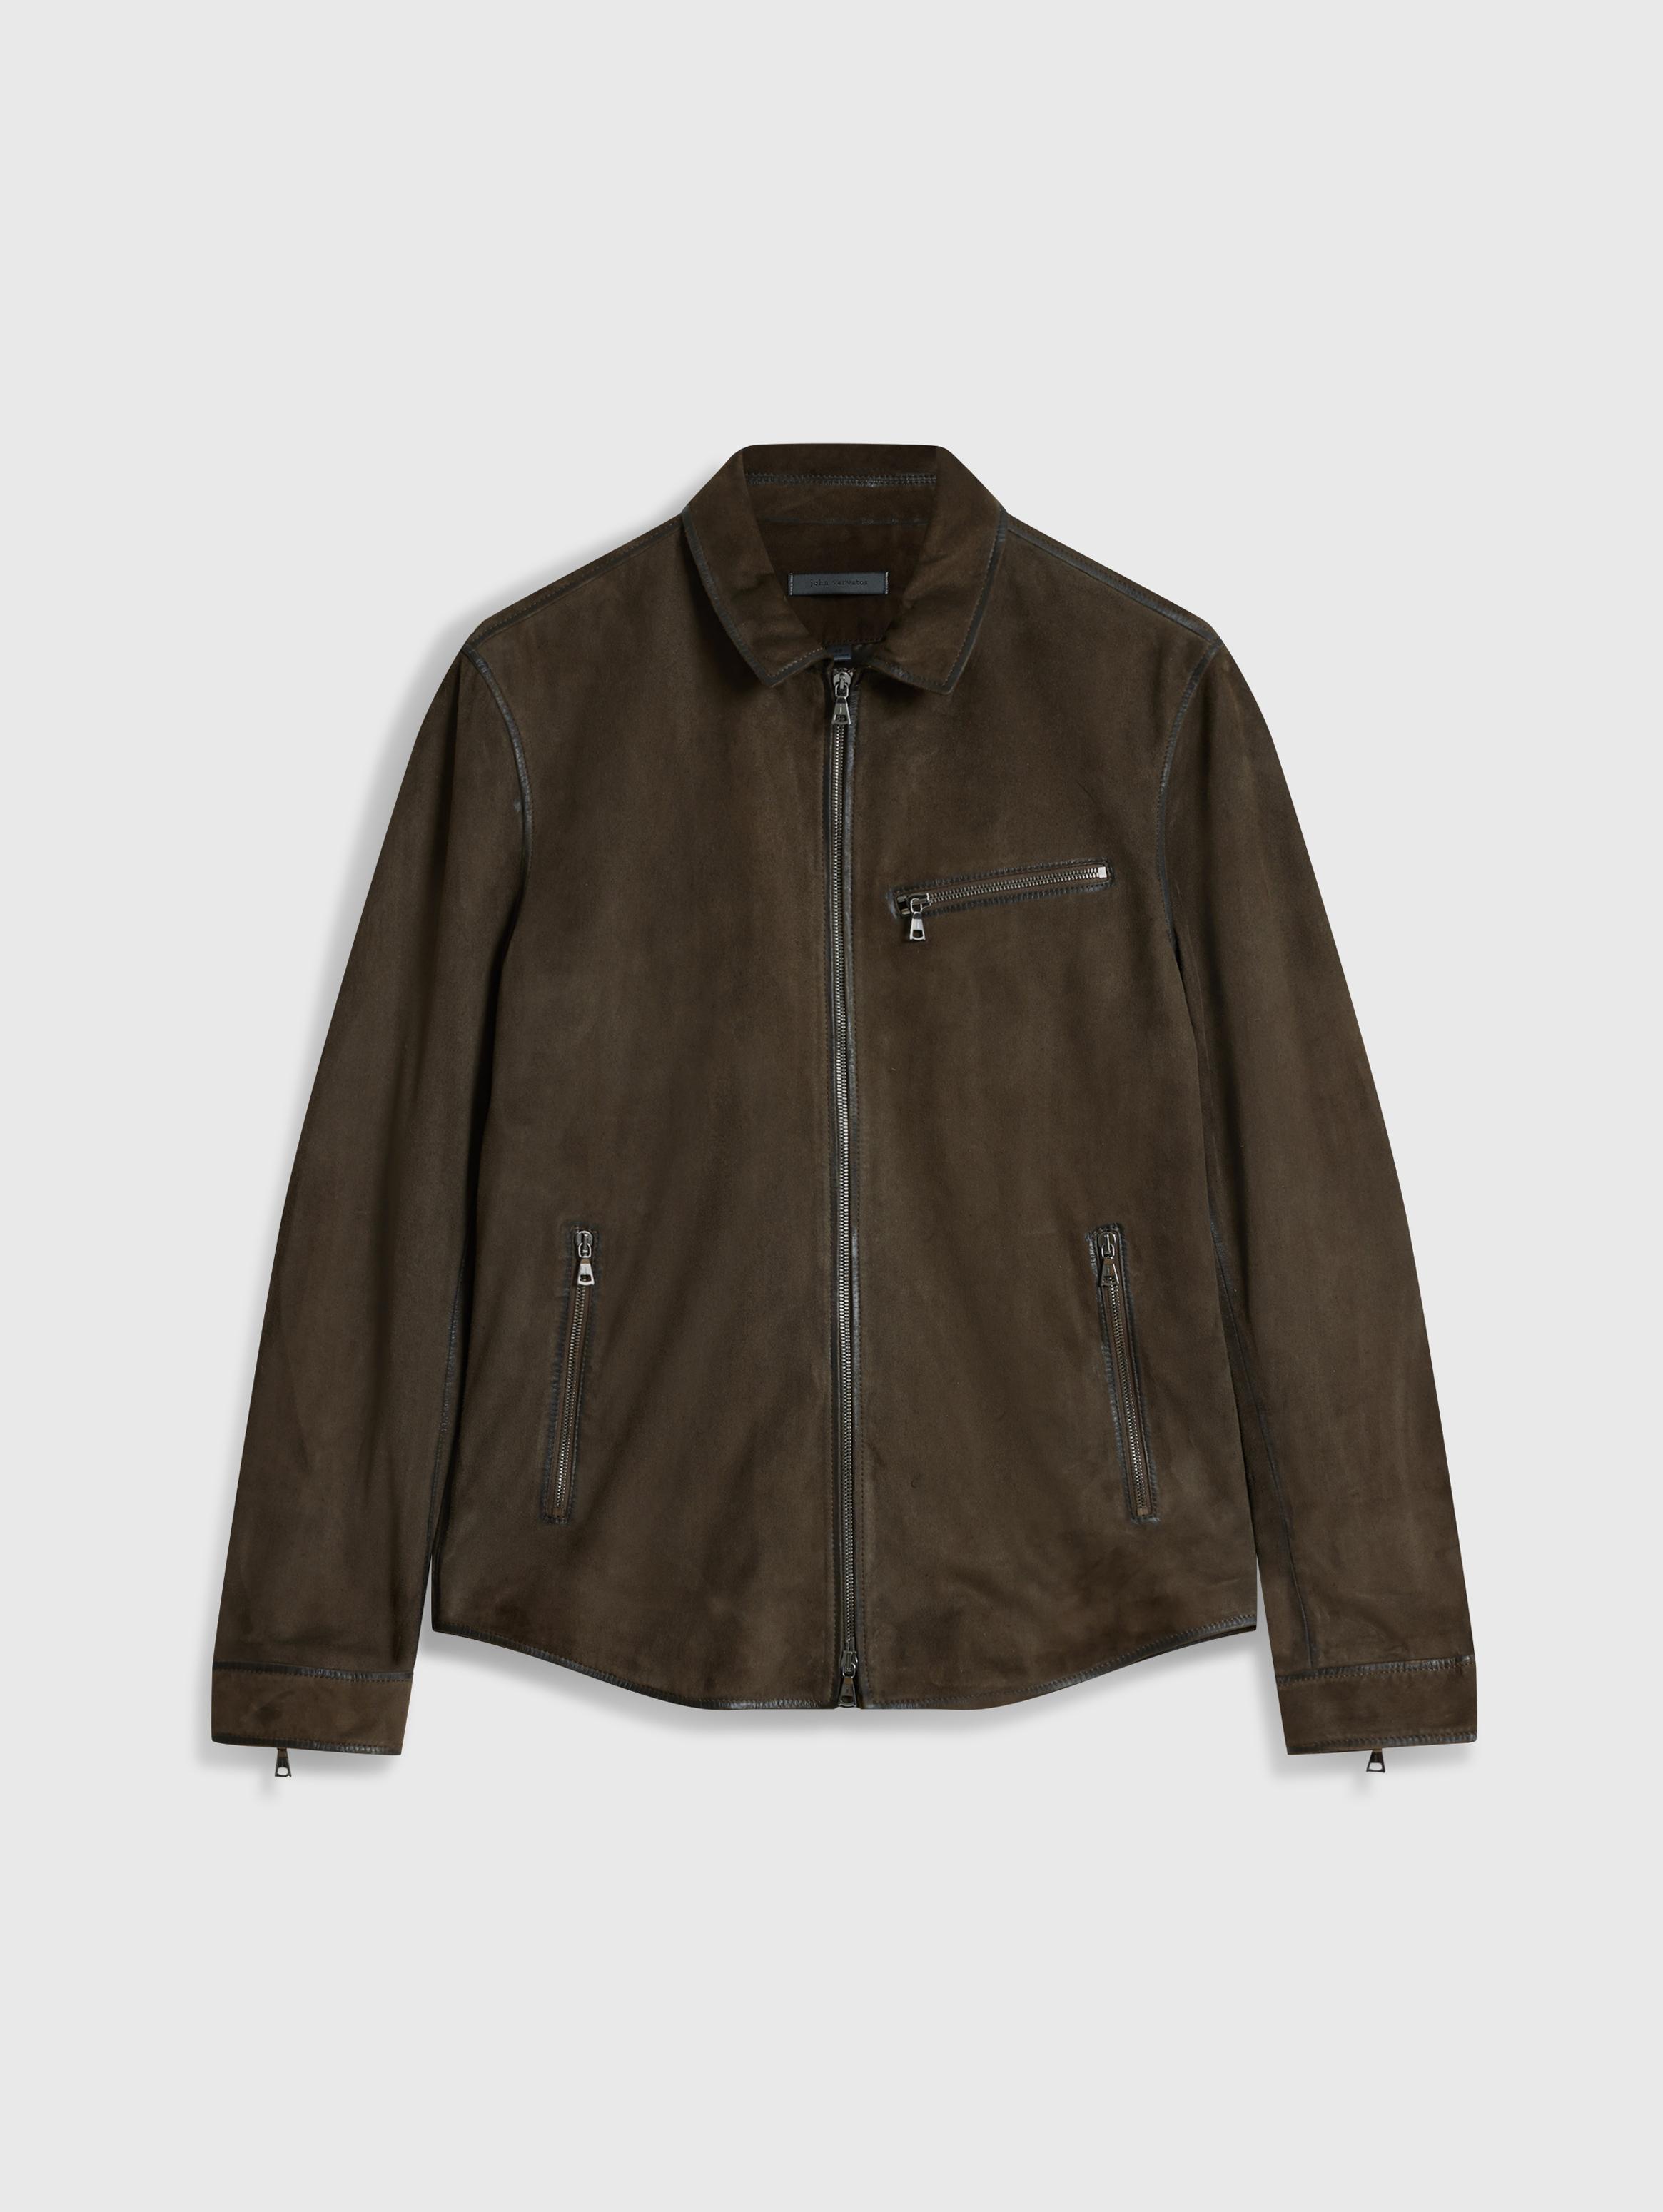 One Jacket, Two Spies – The John Varvatos Suede Racer Jacket